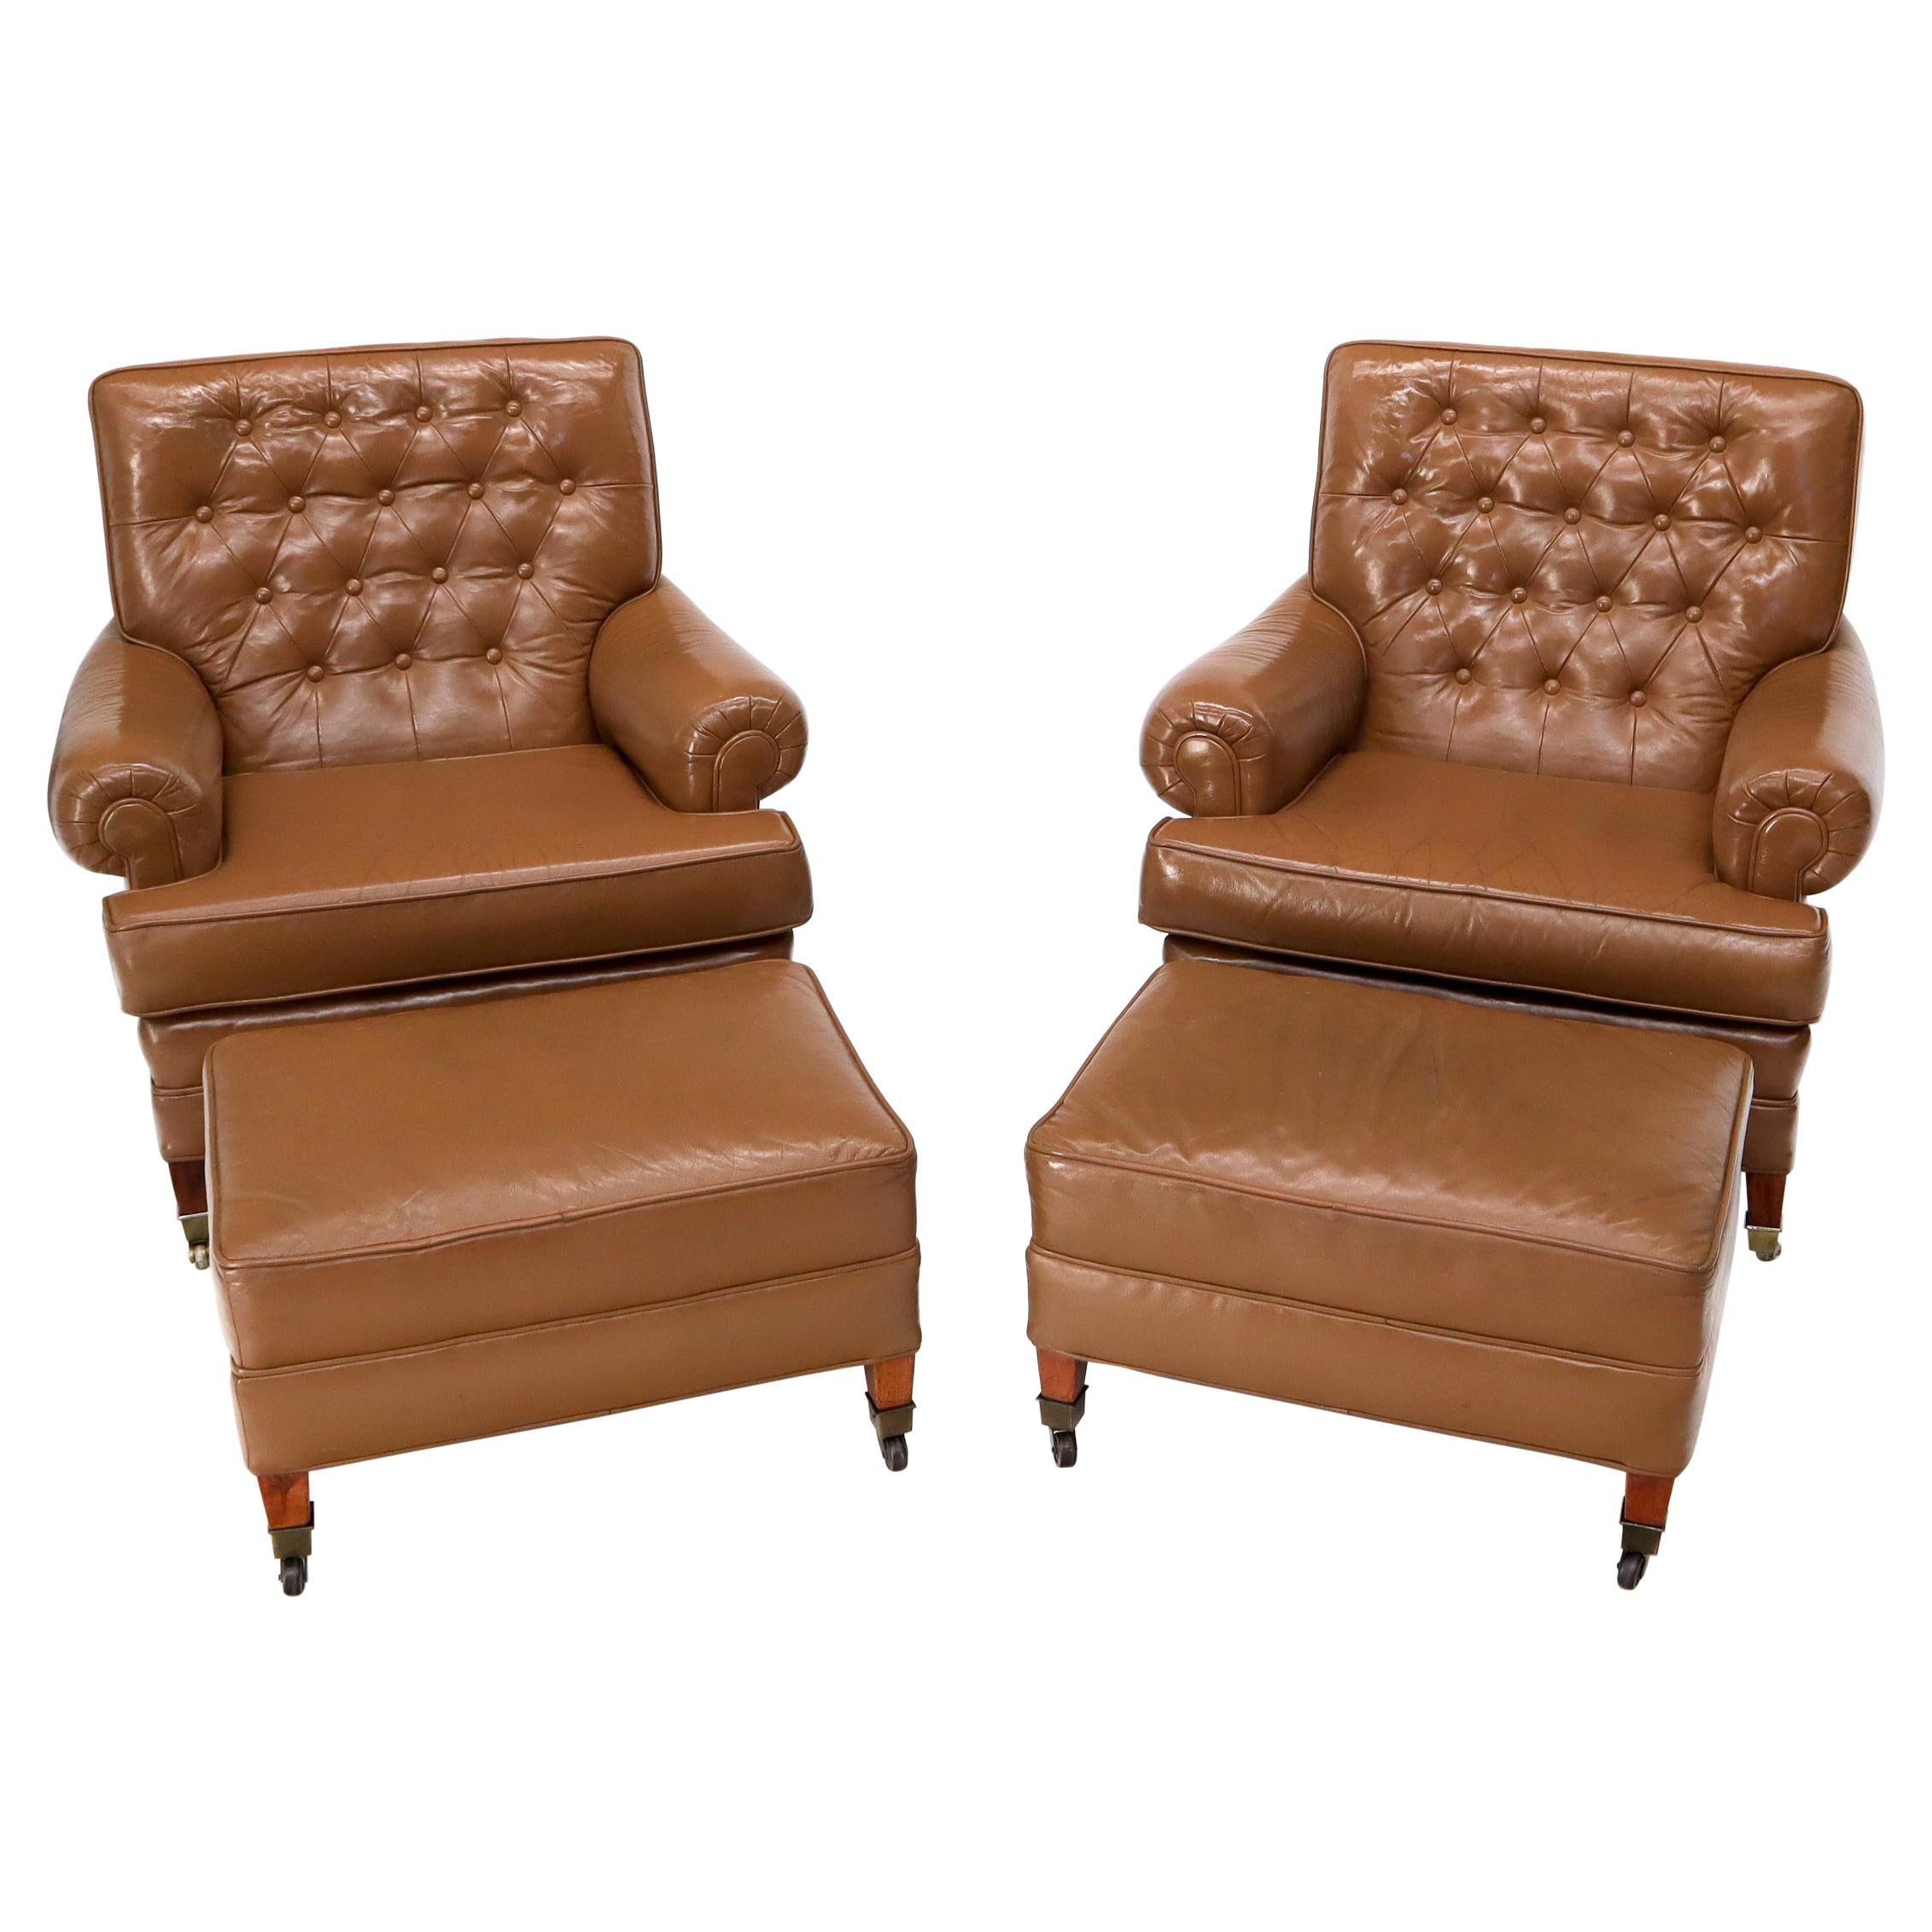 Pair of Chesterfield Style Leather Chairs W/ Ottomans Brown to Tan For Sale